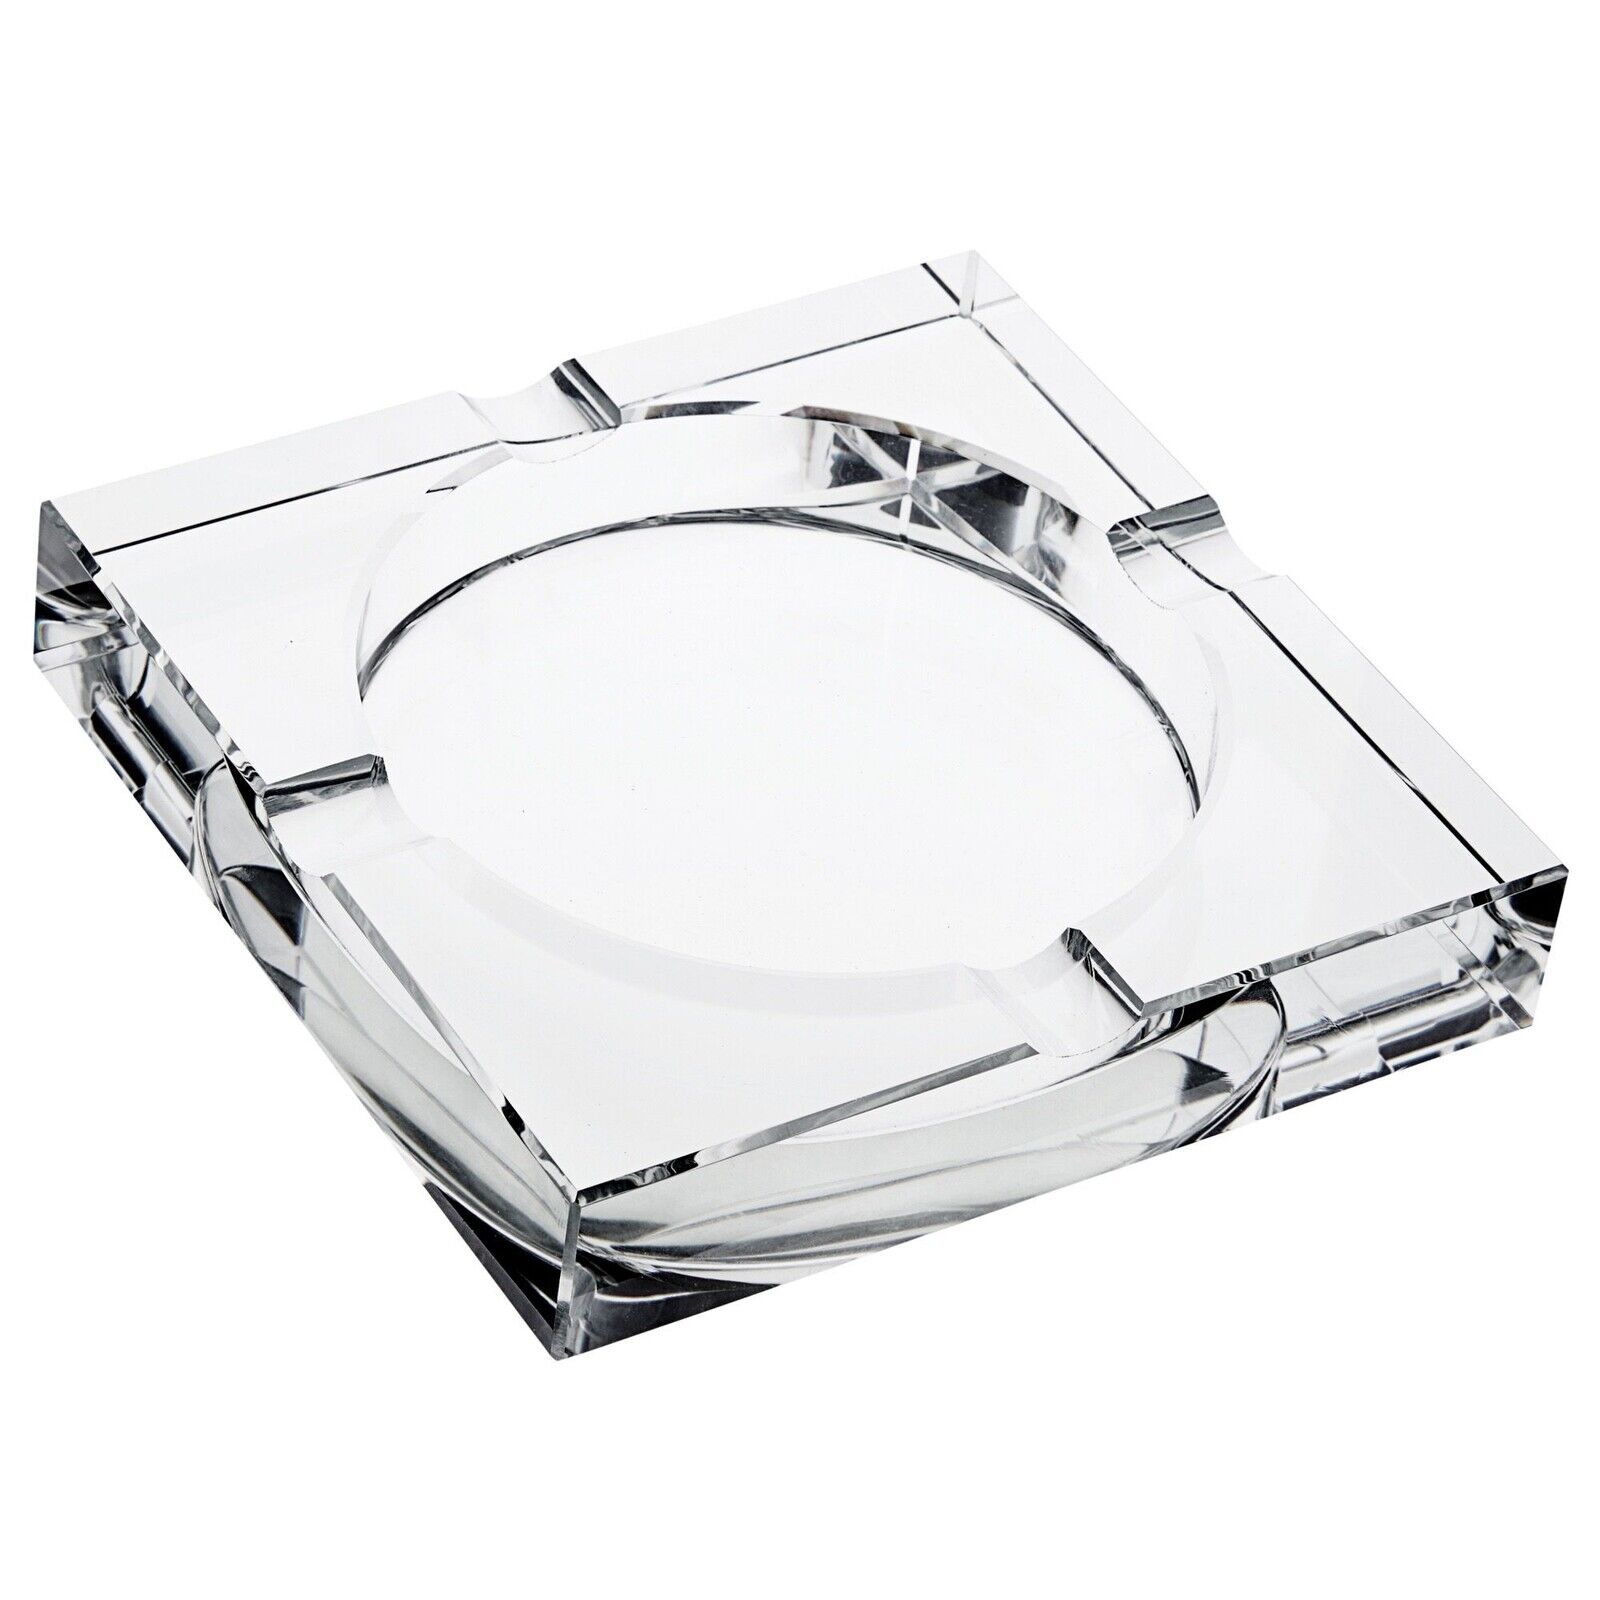 Square Glass Crystal Ashtray with 4 Slots for Cigars, Home, 7x7x1.5 In